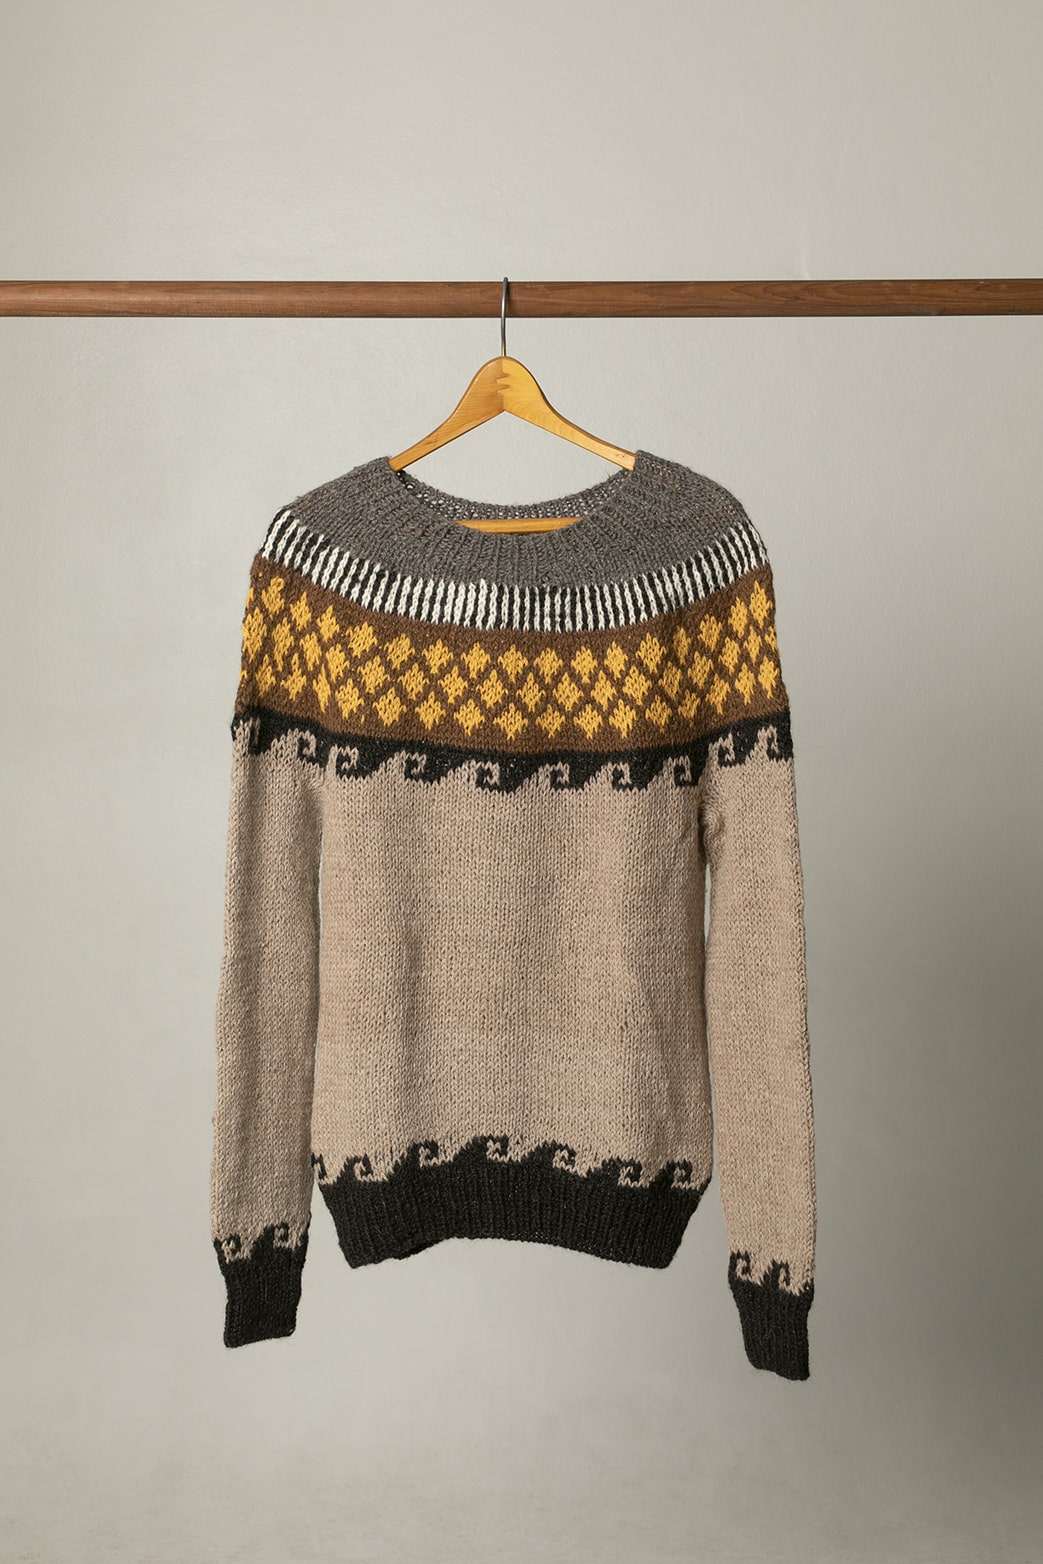 Lama Wollpullover mit Muster